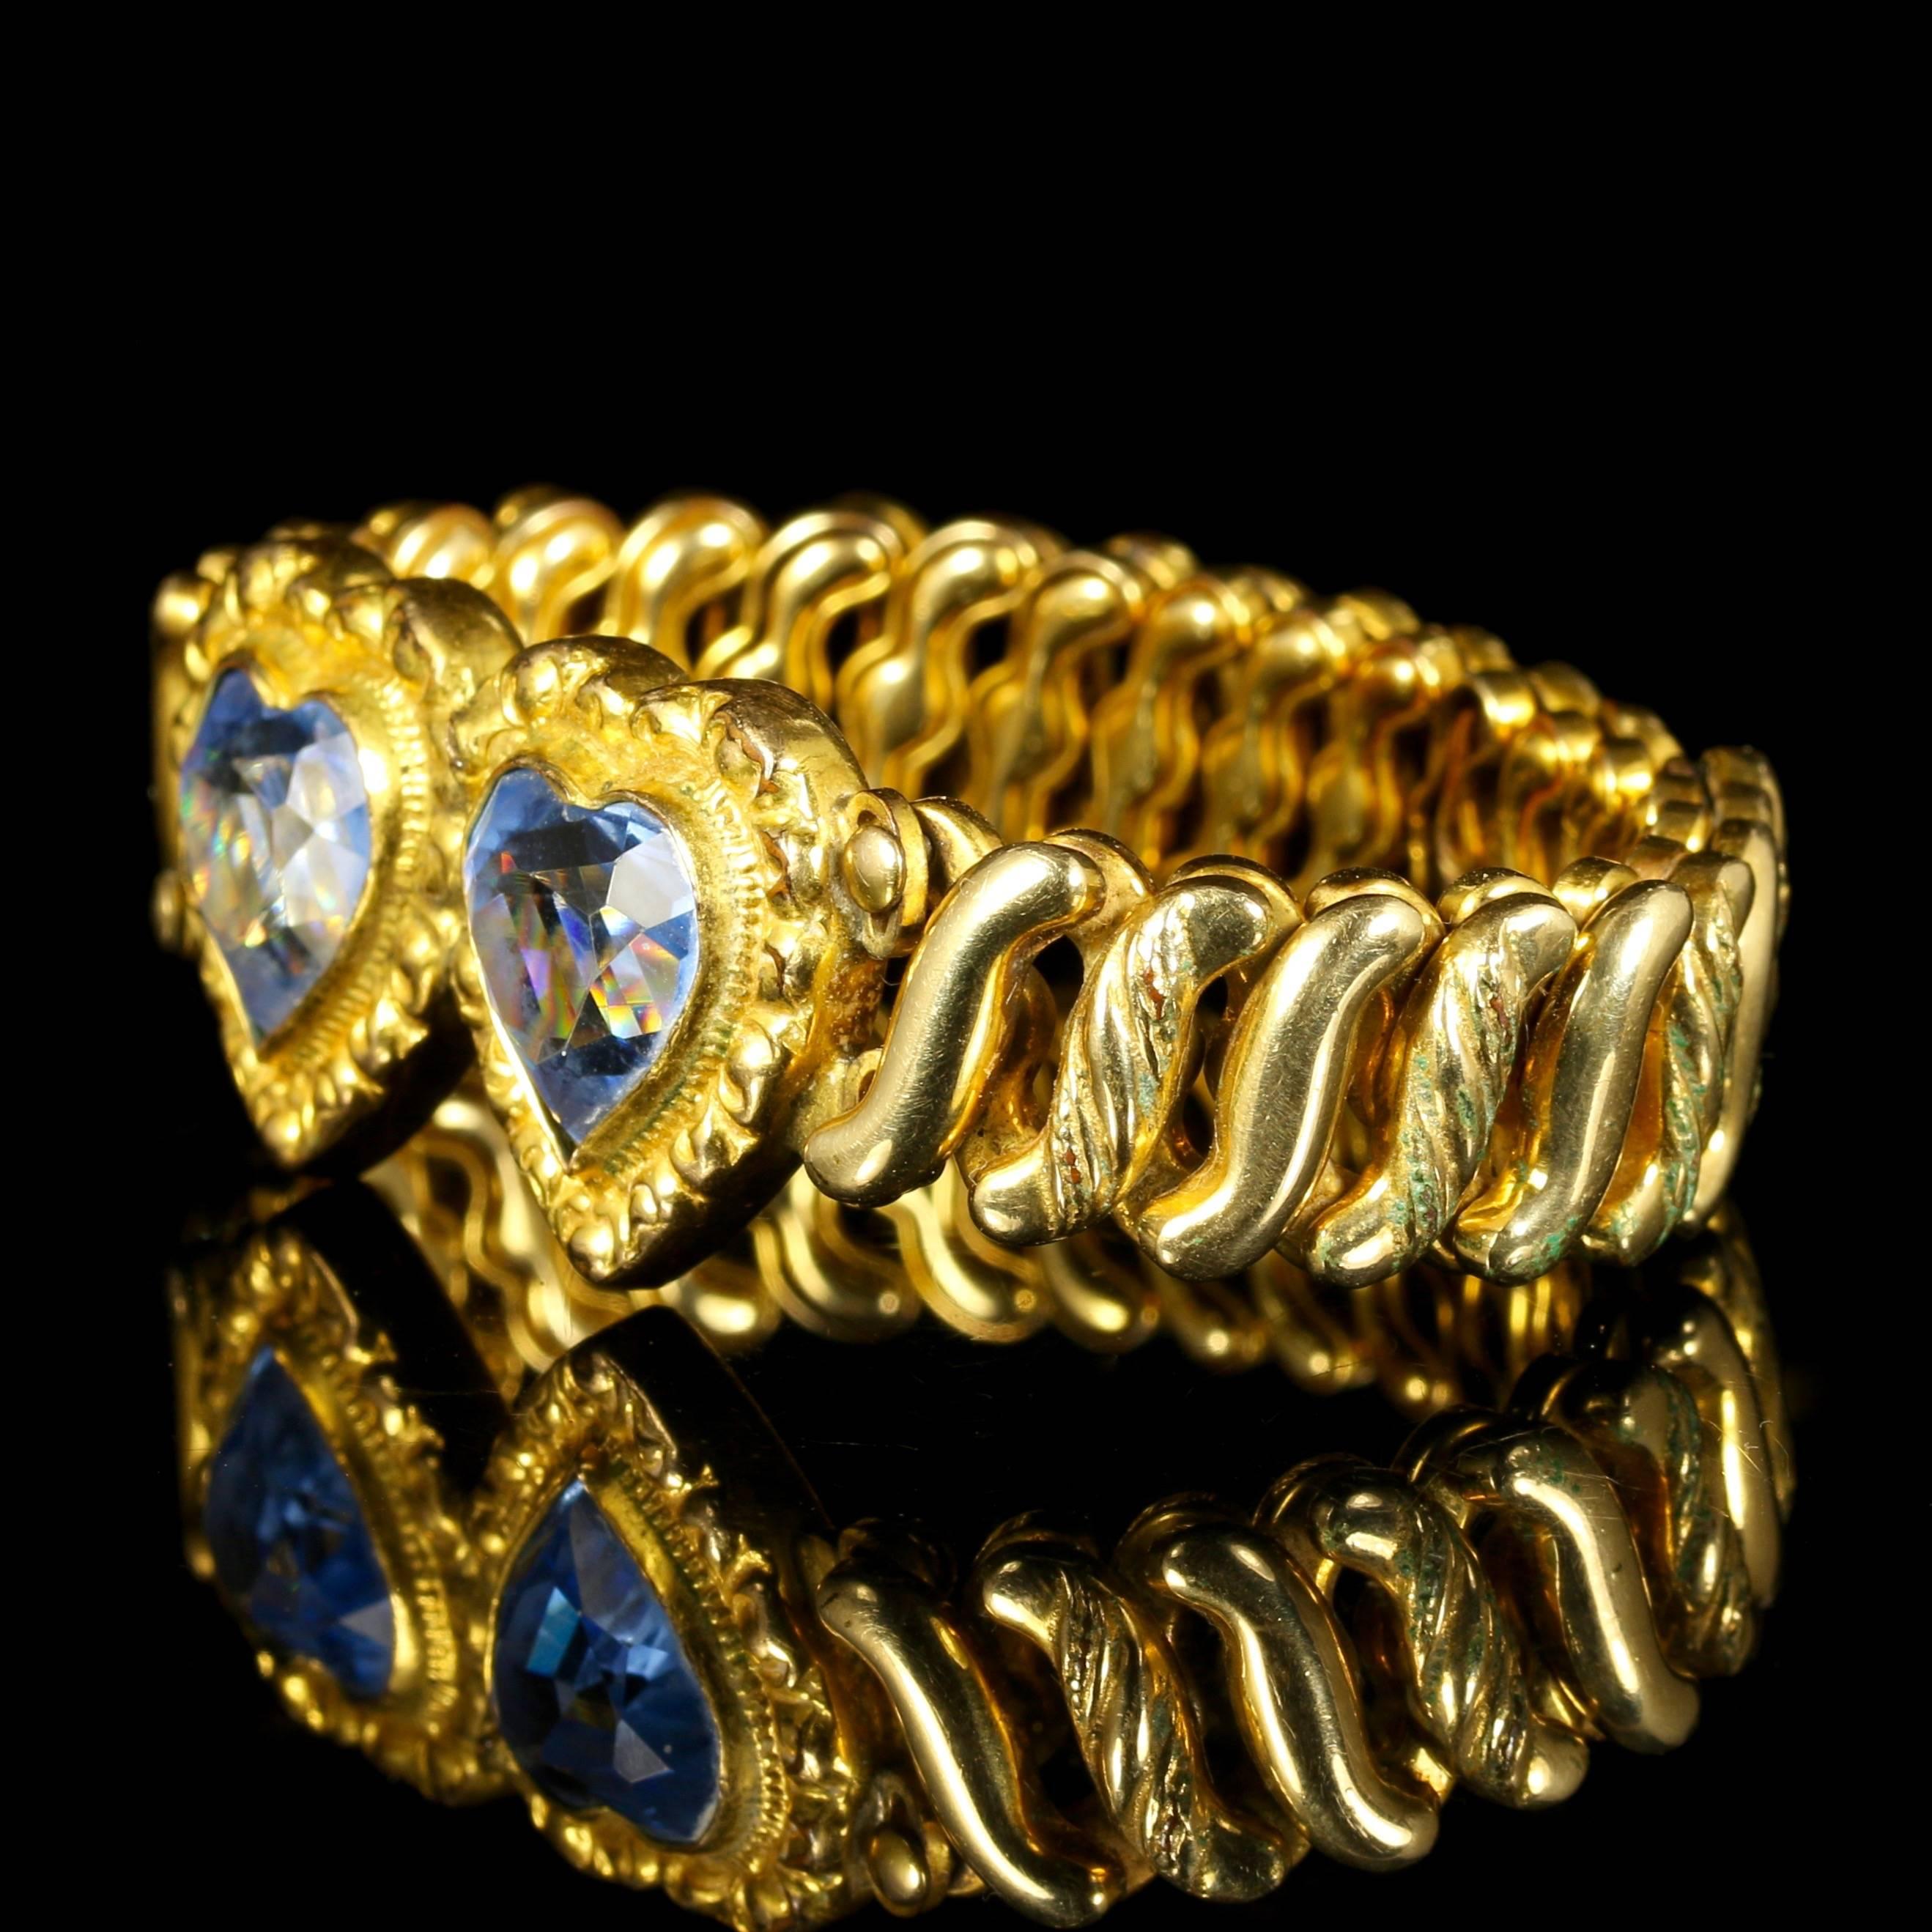 This fabulous Victorian 18ct rolled gold bracelet is expandable so will fit most size wrists.

Two beautiful large blue paste hearts are set in a lovely ornate gallery.

Beautiful engraving around every alternative link on the bracelet.

Paste is a